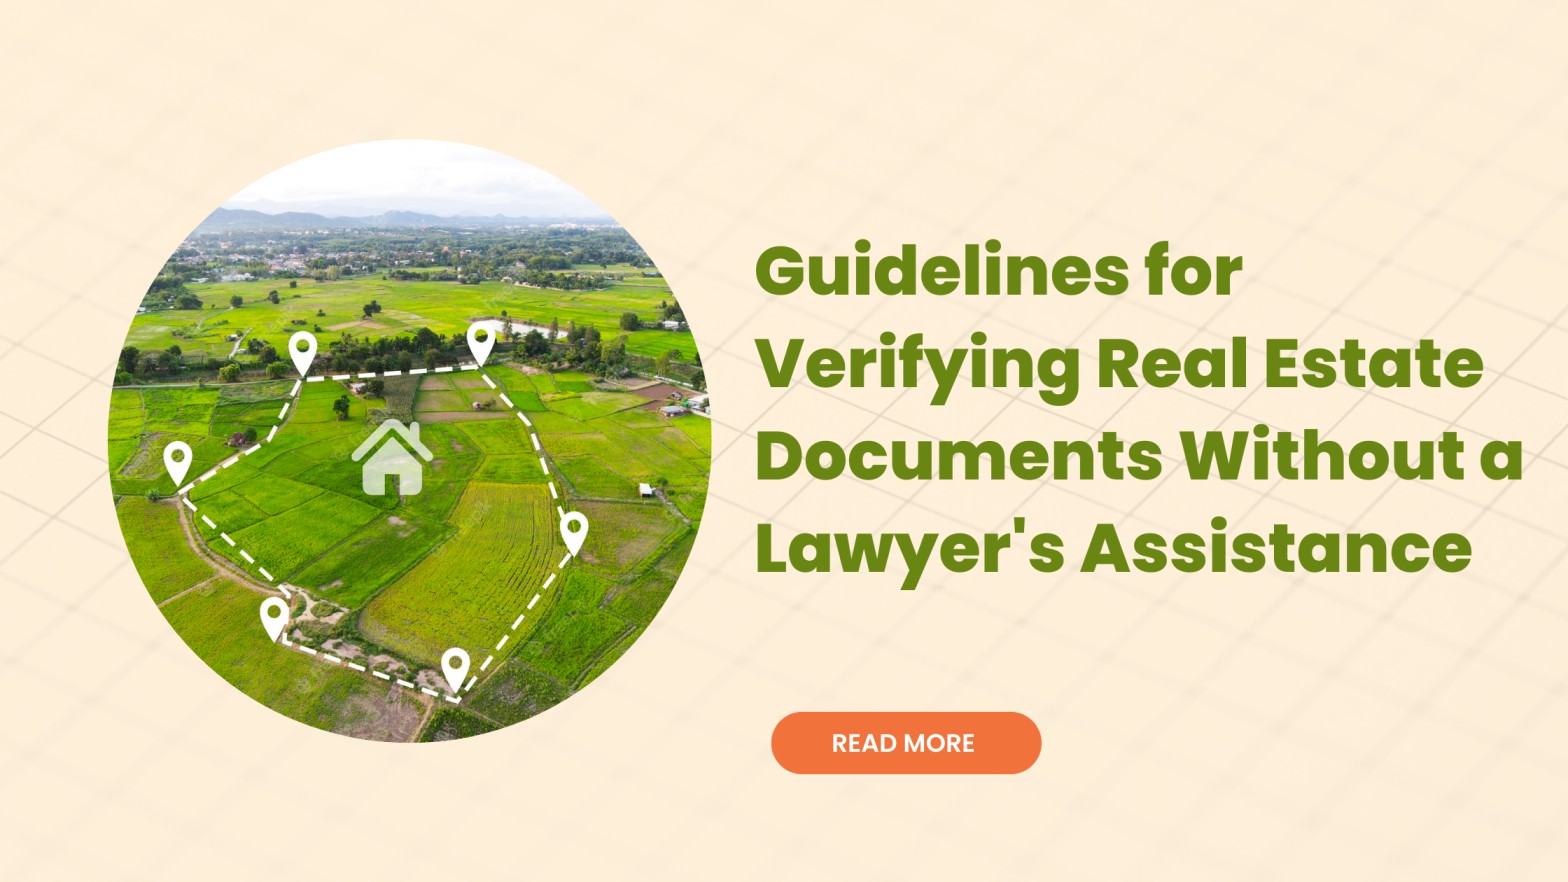 Guidelines for Verifying Real Estate Documents Without a Lawyer’s Assistance